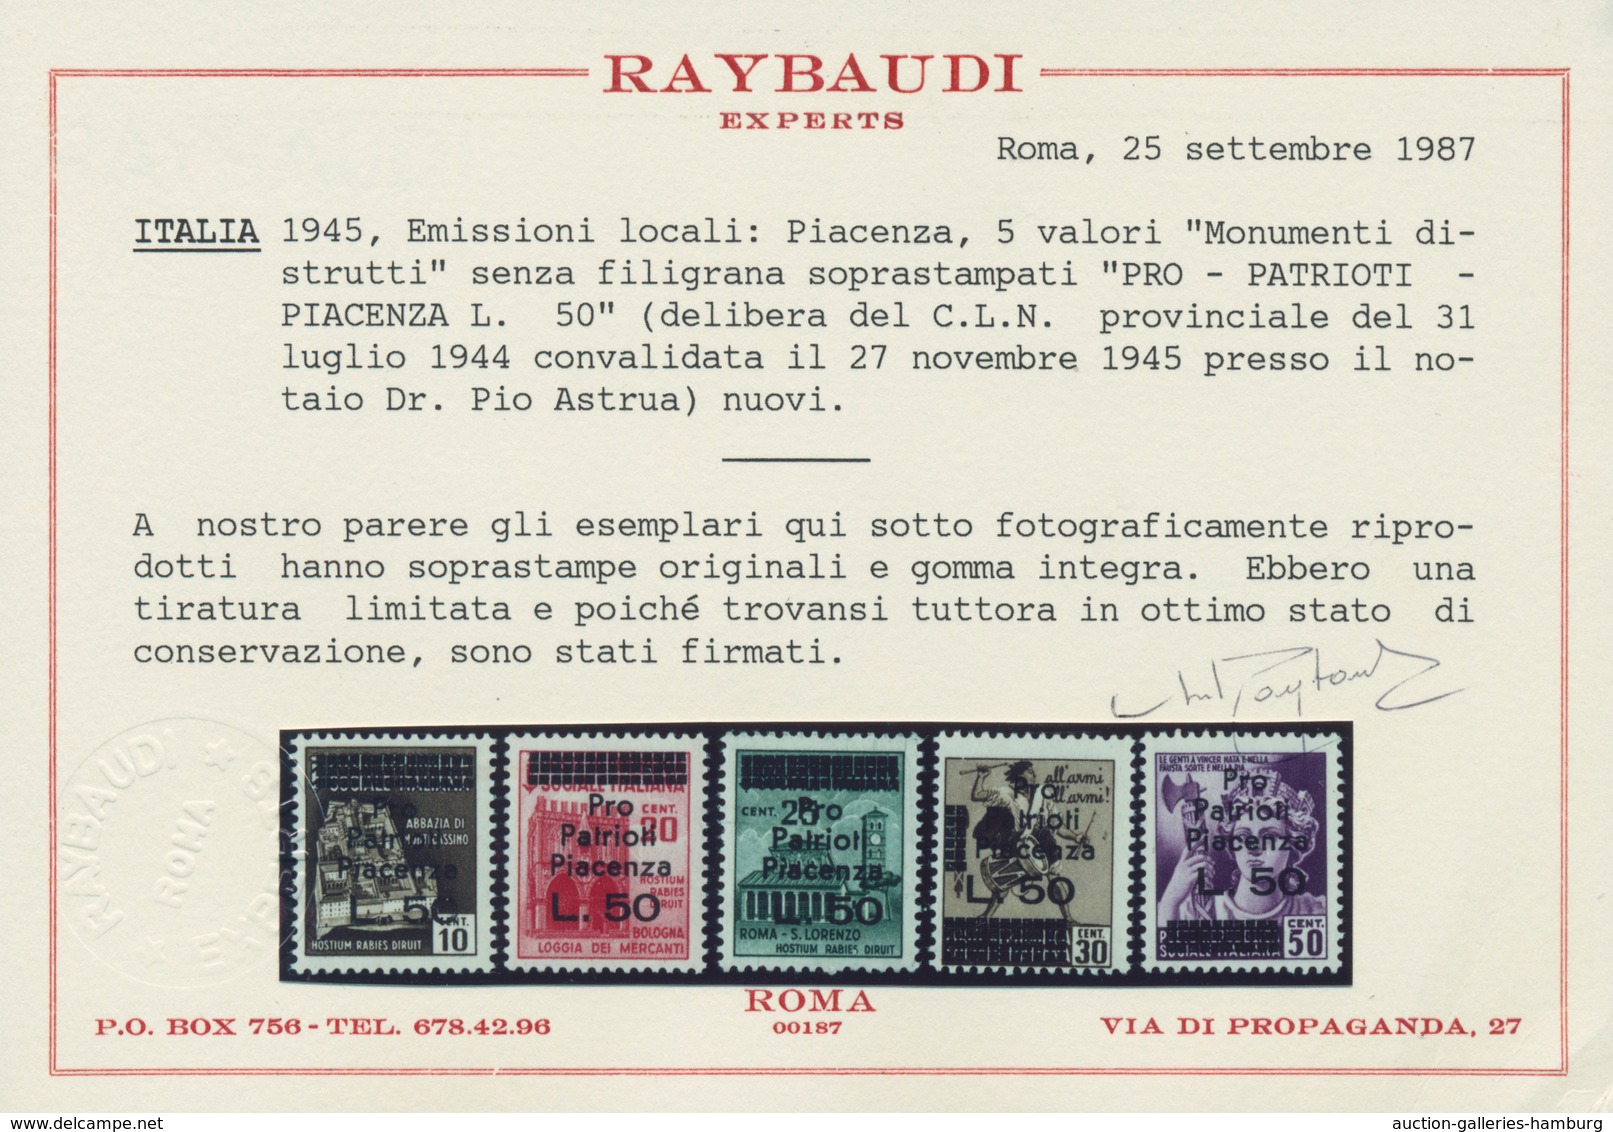 Italien: 1944-45, 2REP. SOC. ITALIANA ISSUES" assembling of high value stamps and blocks, Air mail i